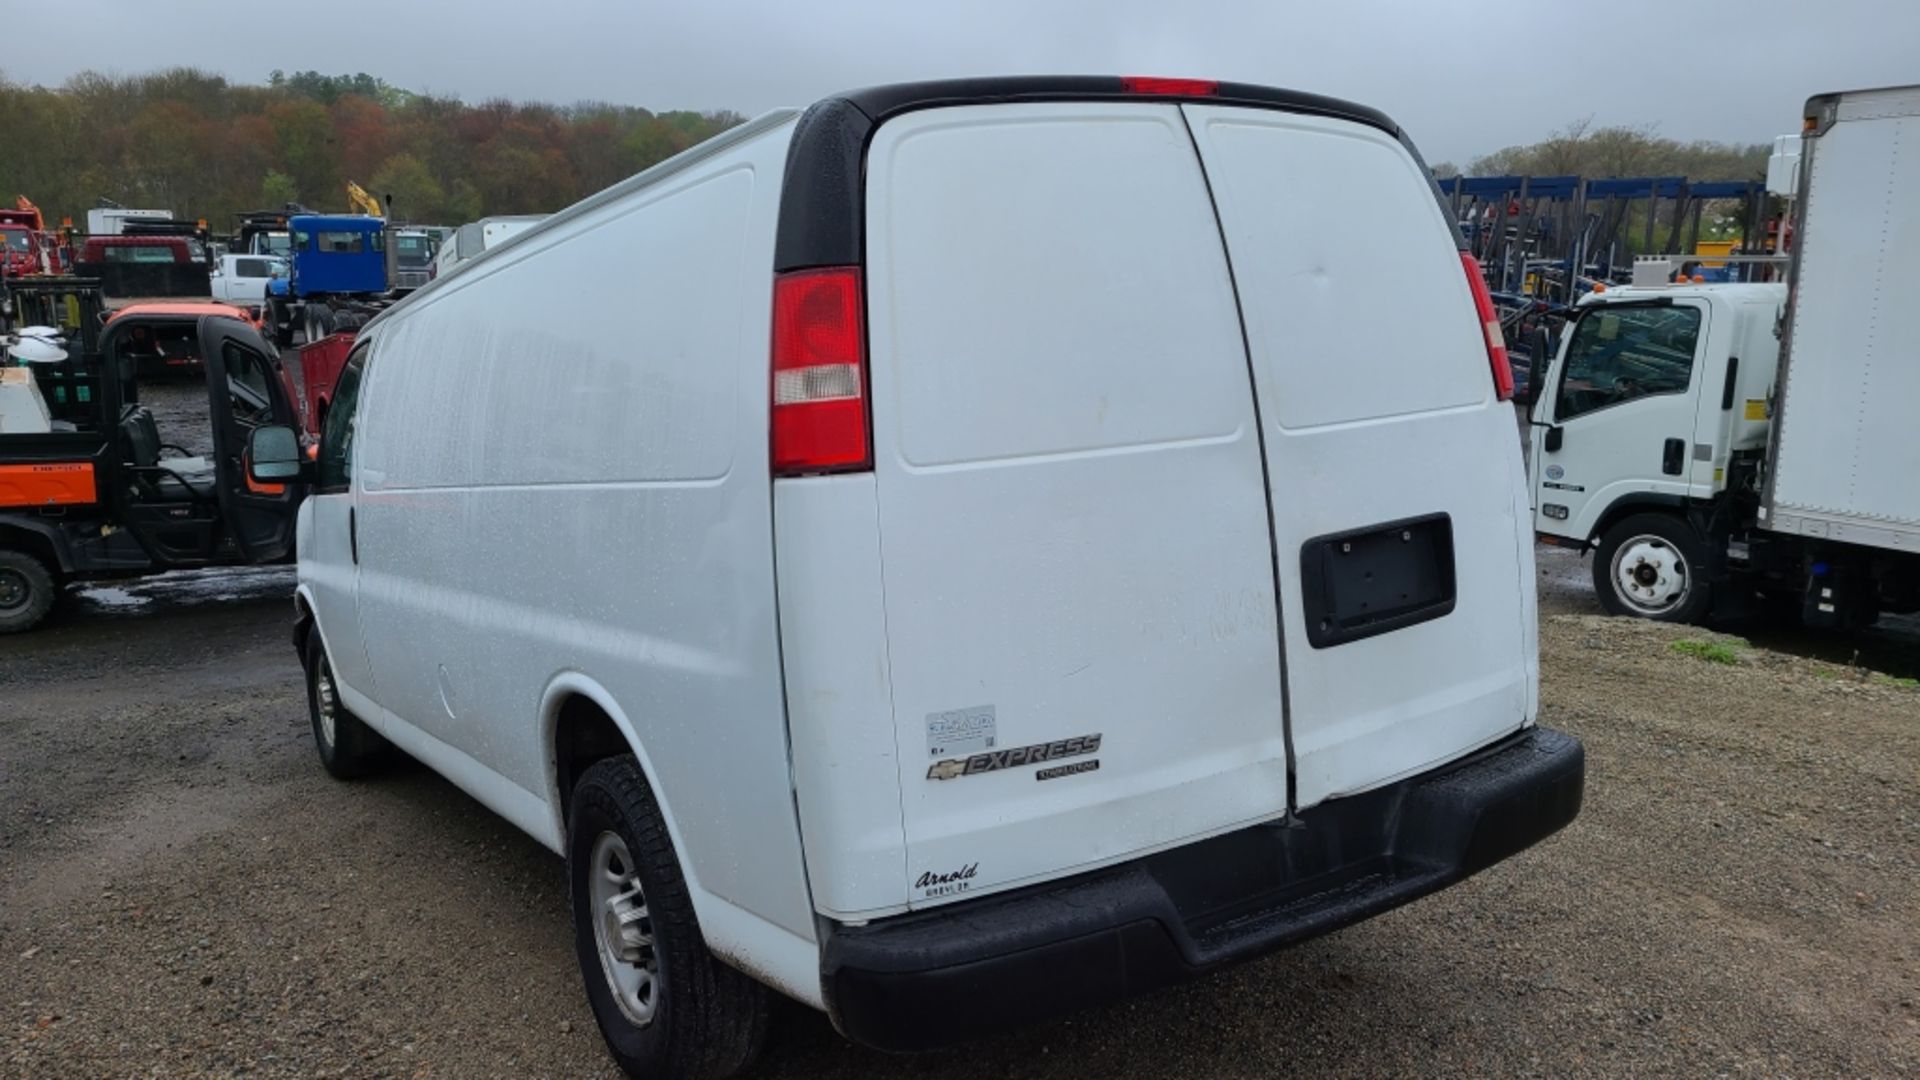 2014 Chevy Express - Image 2 of 5